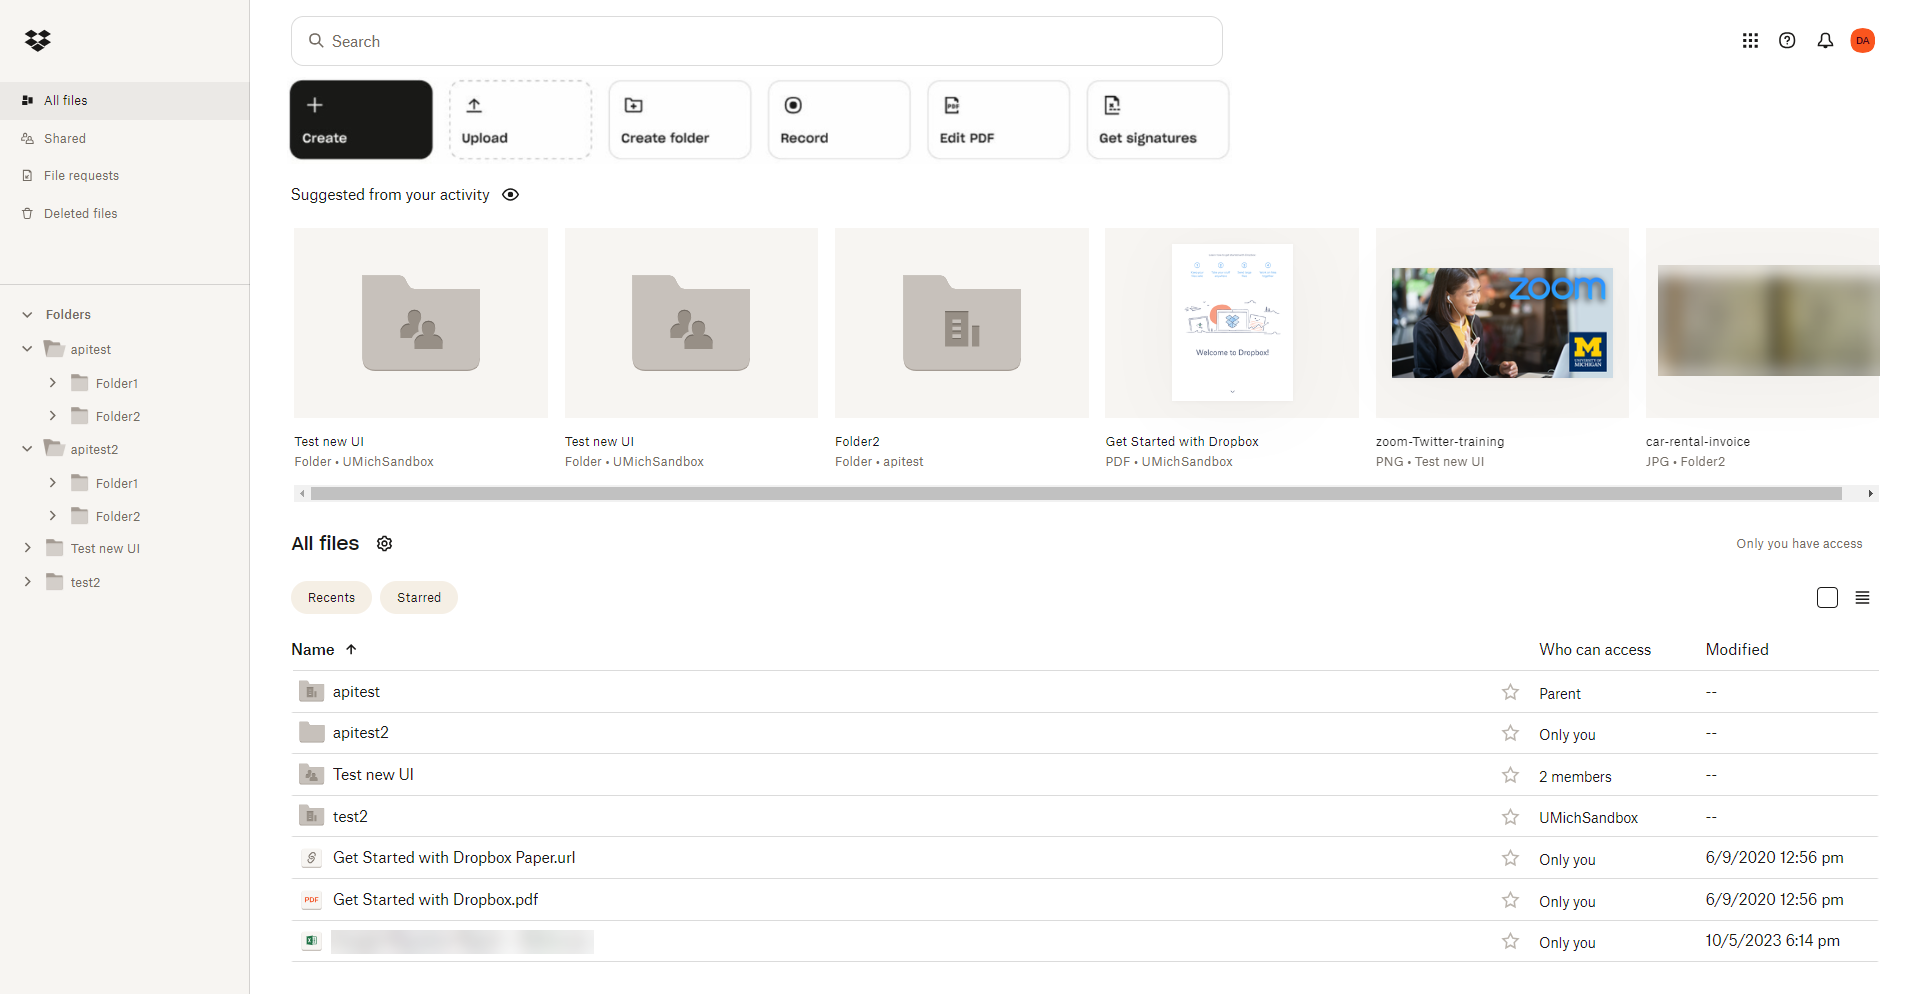 New Dropbox interface showing updated left navigation and folder tree, as well as the new action bar and file view.